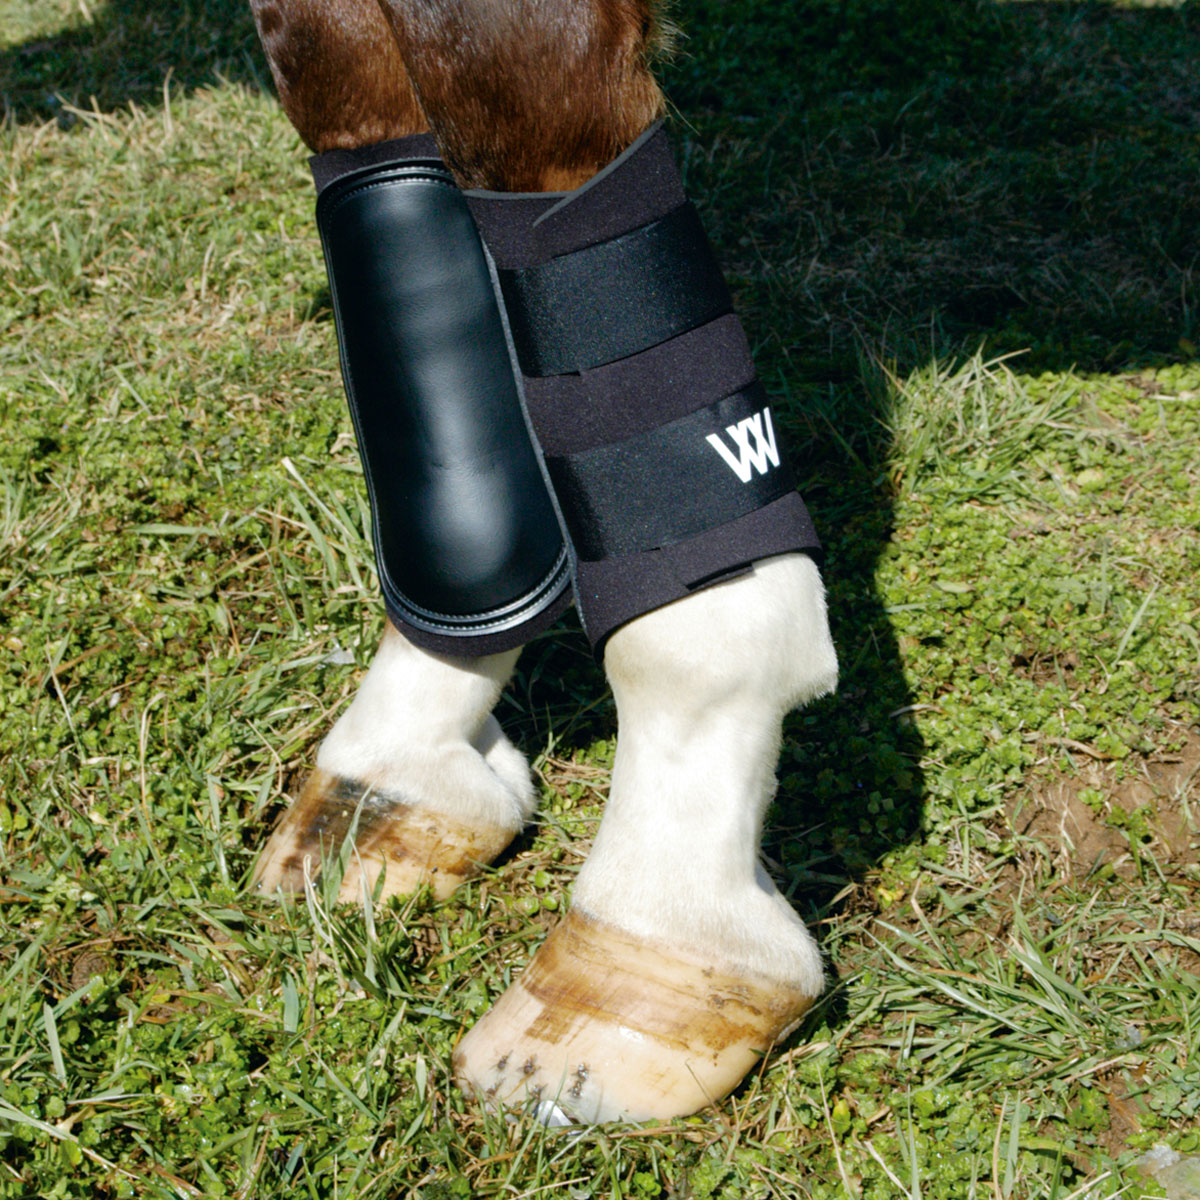 White All Sizes Woof Wear Pro Horse Boot Fetlock Boots 